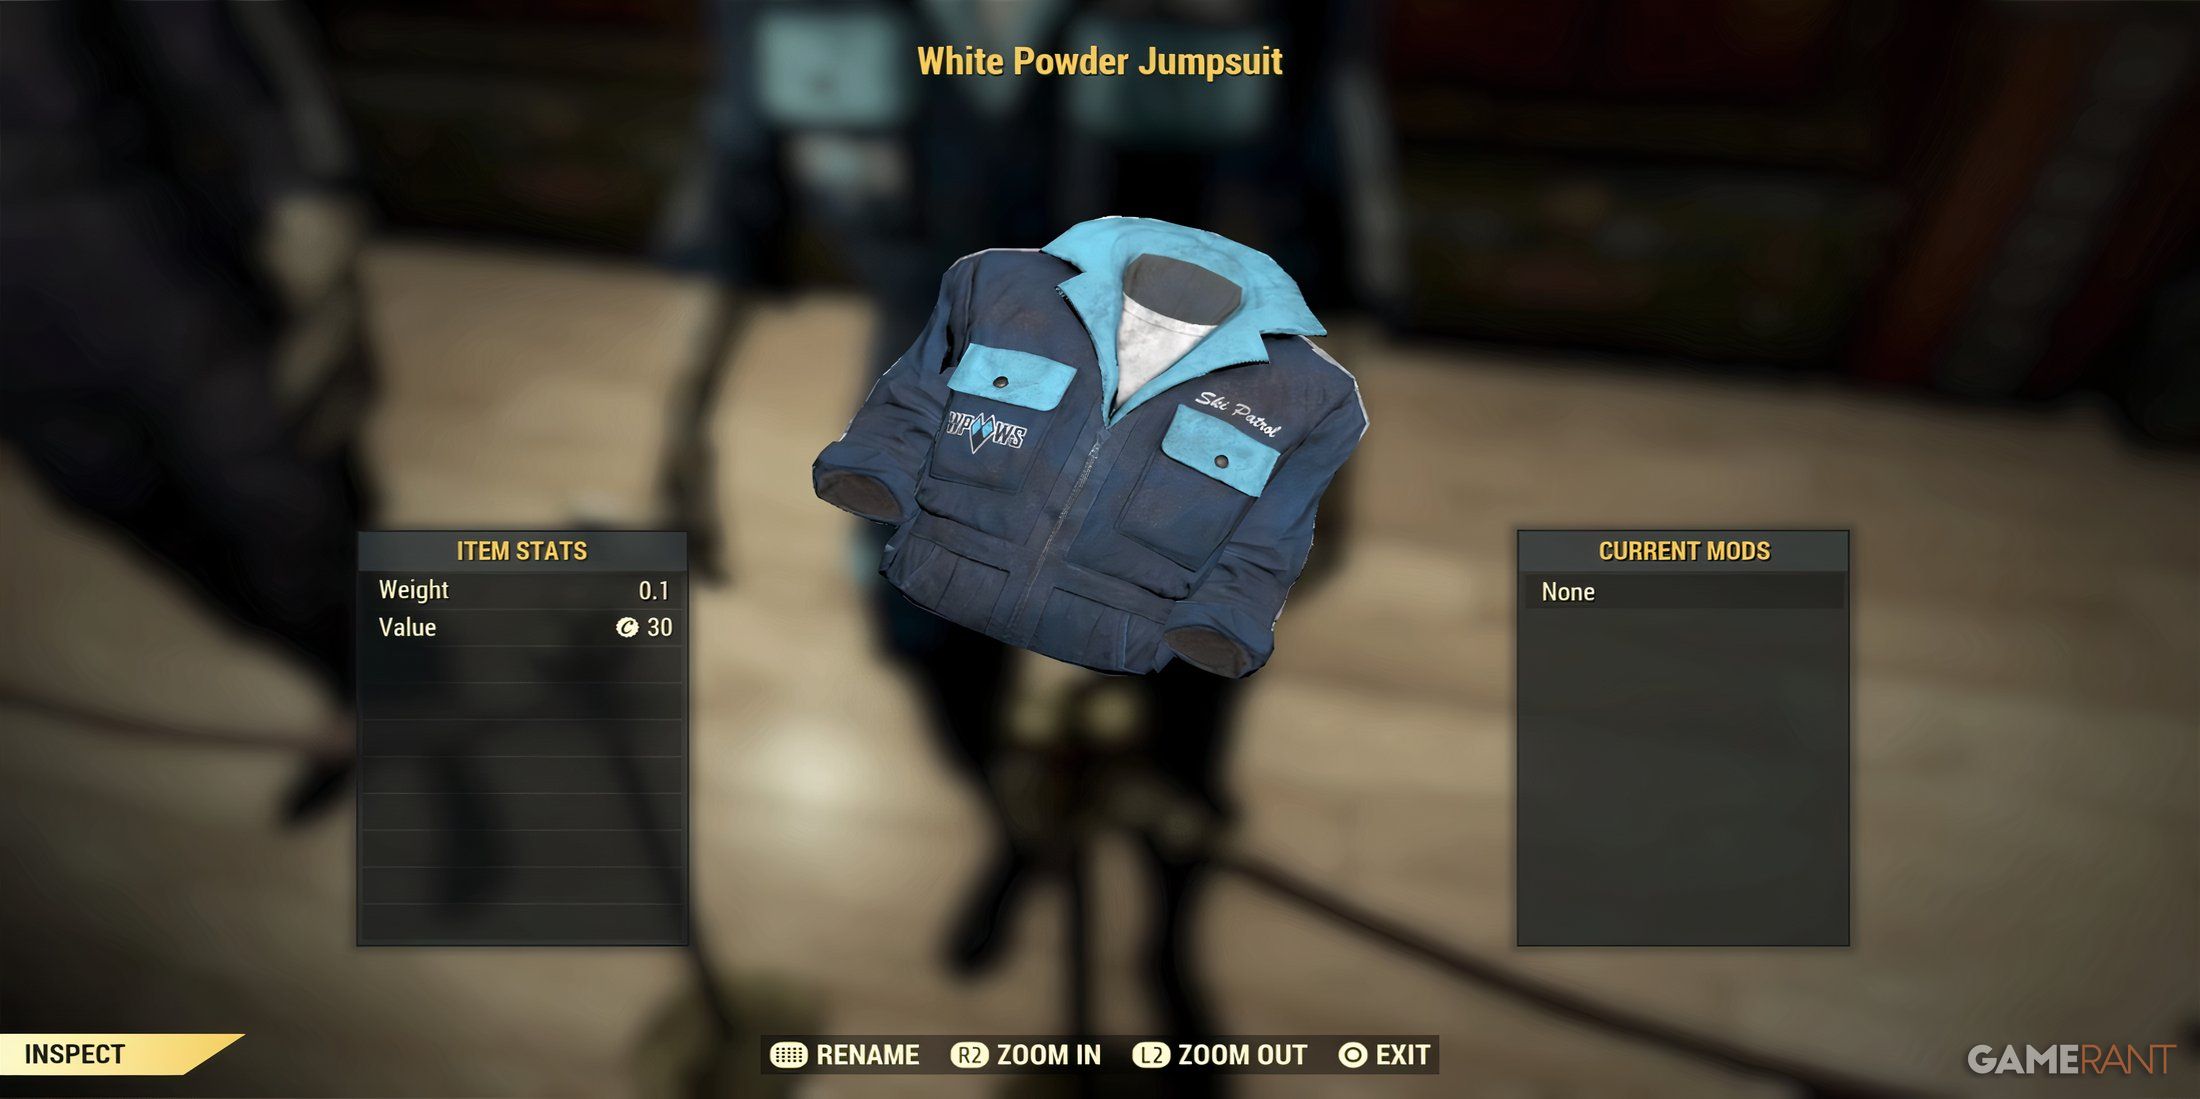 White Powder Jumpsuit in Fallout 76